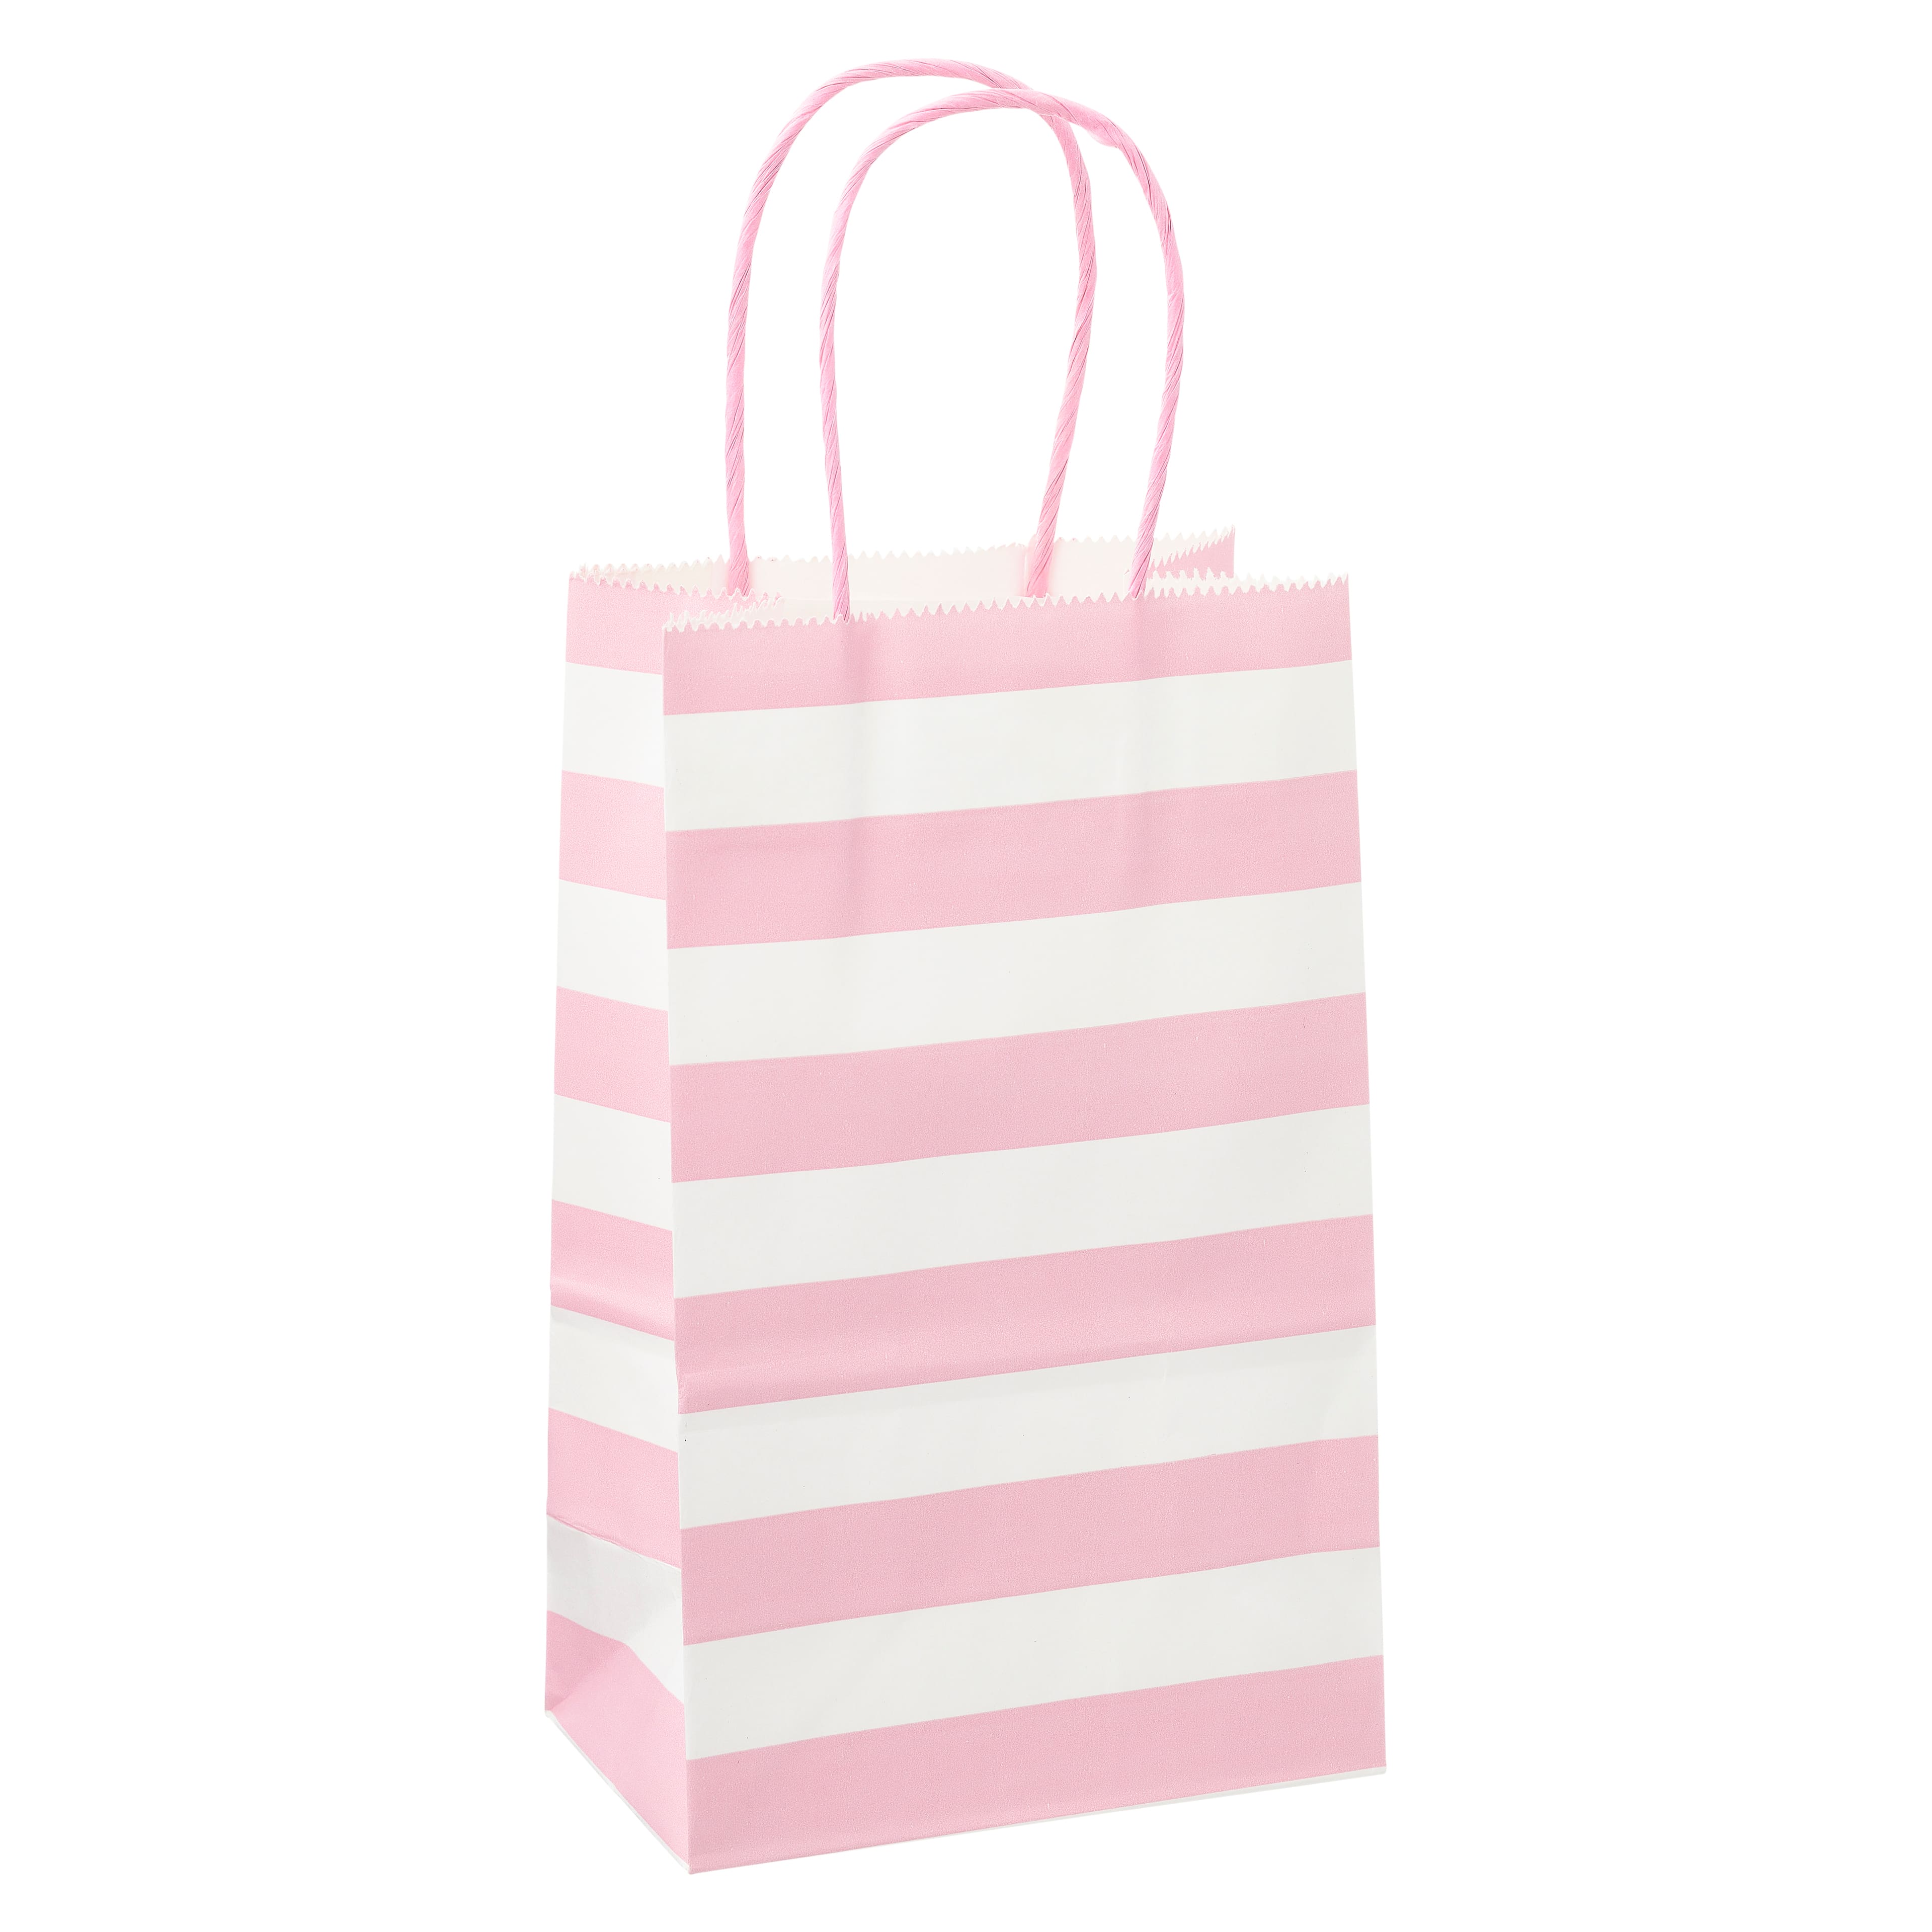 8 Packs: 13 ct. (104 total) Small Pastel Stripe Gift Bags by Celebrate It&#x2122;